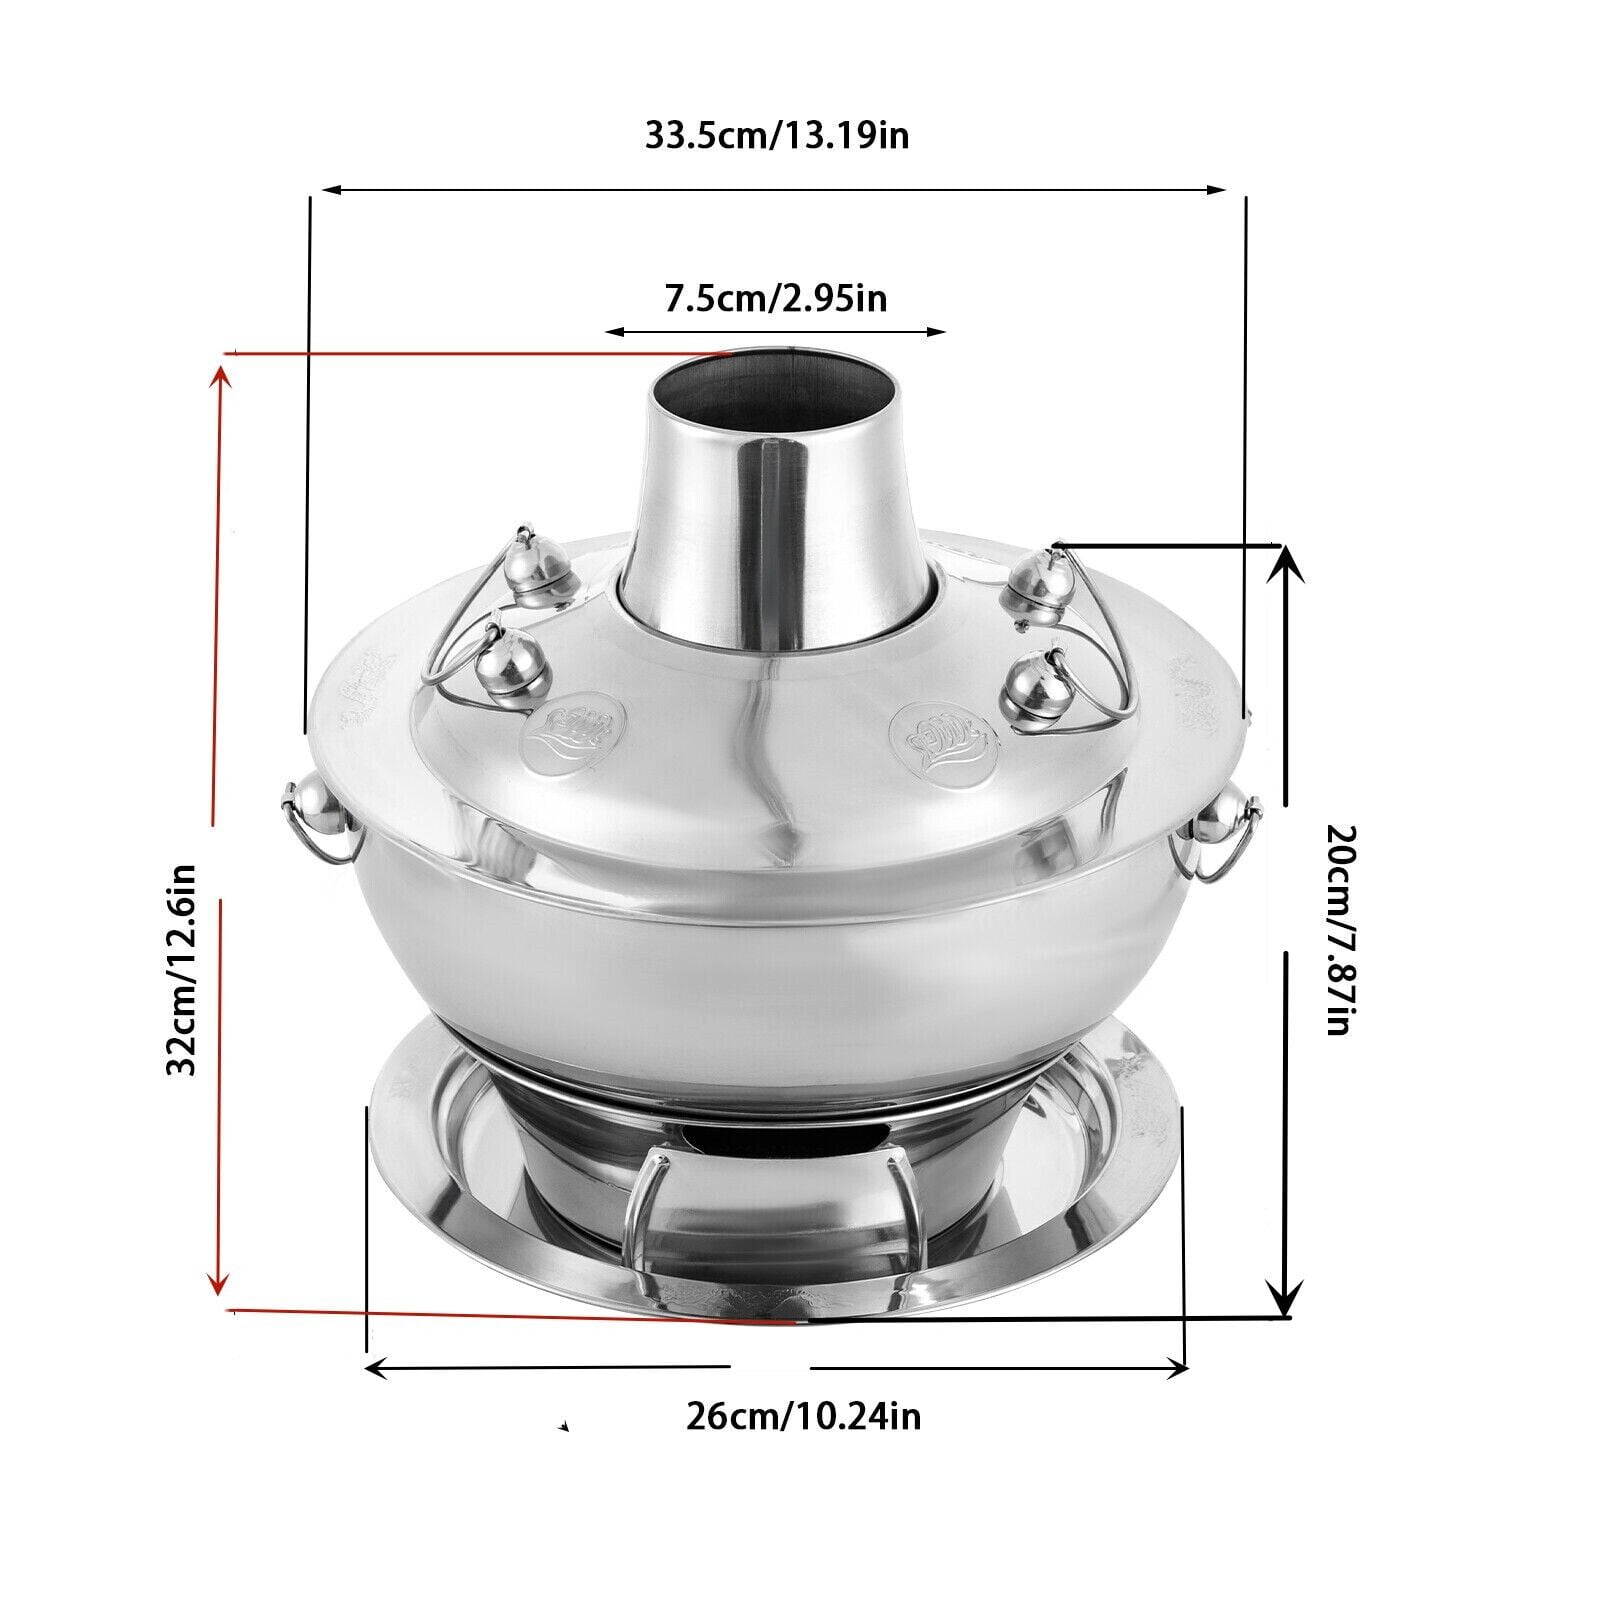 Chinese Hot Pot Old Beijing Hotpot with Handles Vintage Practical  Multifunctional Stainless Steel Hot Pot Traditional Chinese Small Hot Pot  18cm